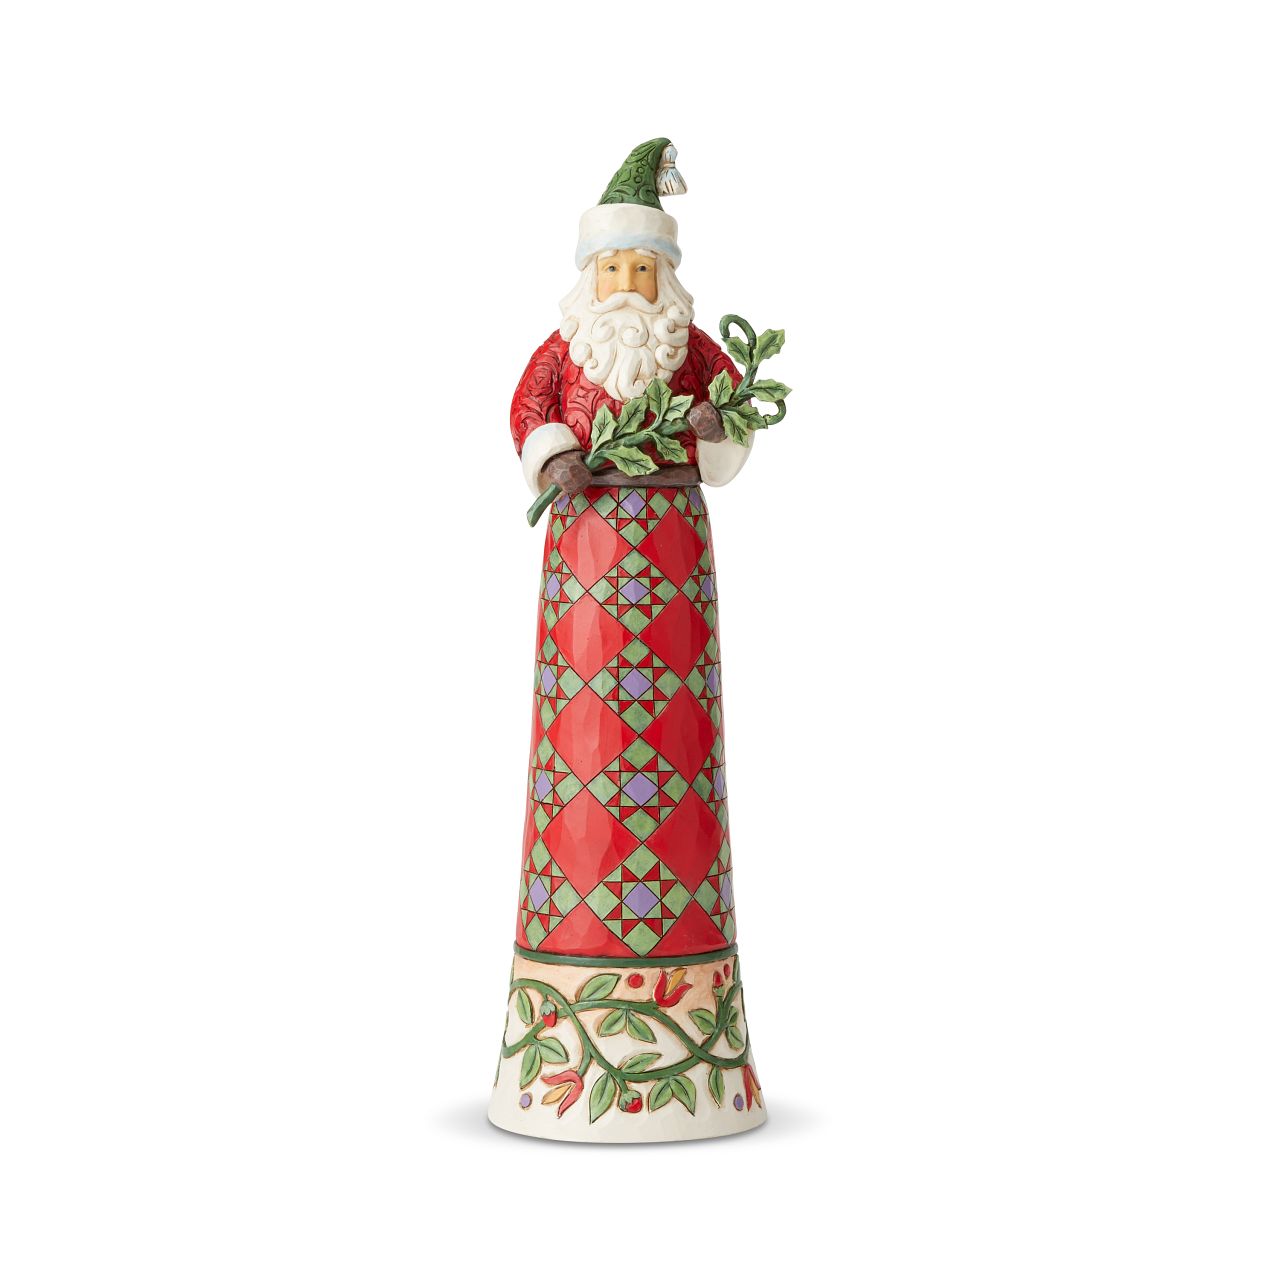 Jim Shore Tall Santa Making Spirits Splendid Figurine  This elegantly proportioned Tall Santa with Branch features a robe decorated with Jim Shore's signature eight-pointed star quilt block patterns accented with a hem of intricate interlocking rosemaling design.